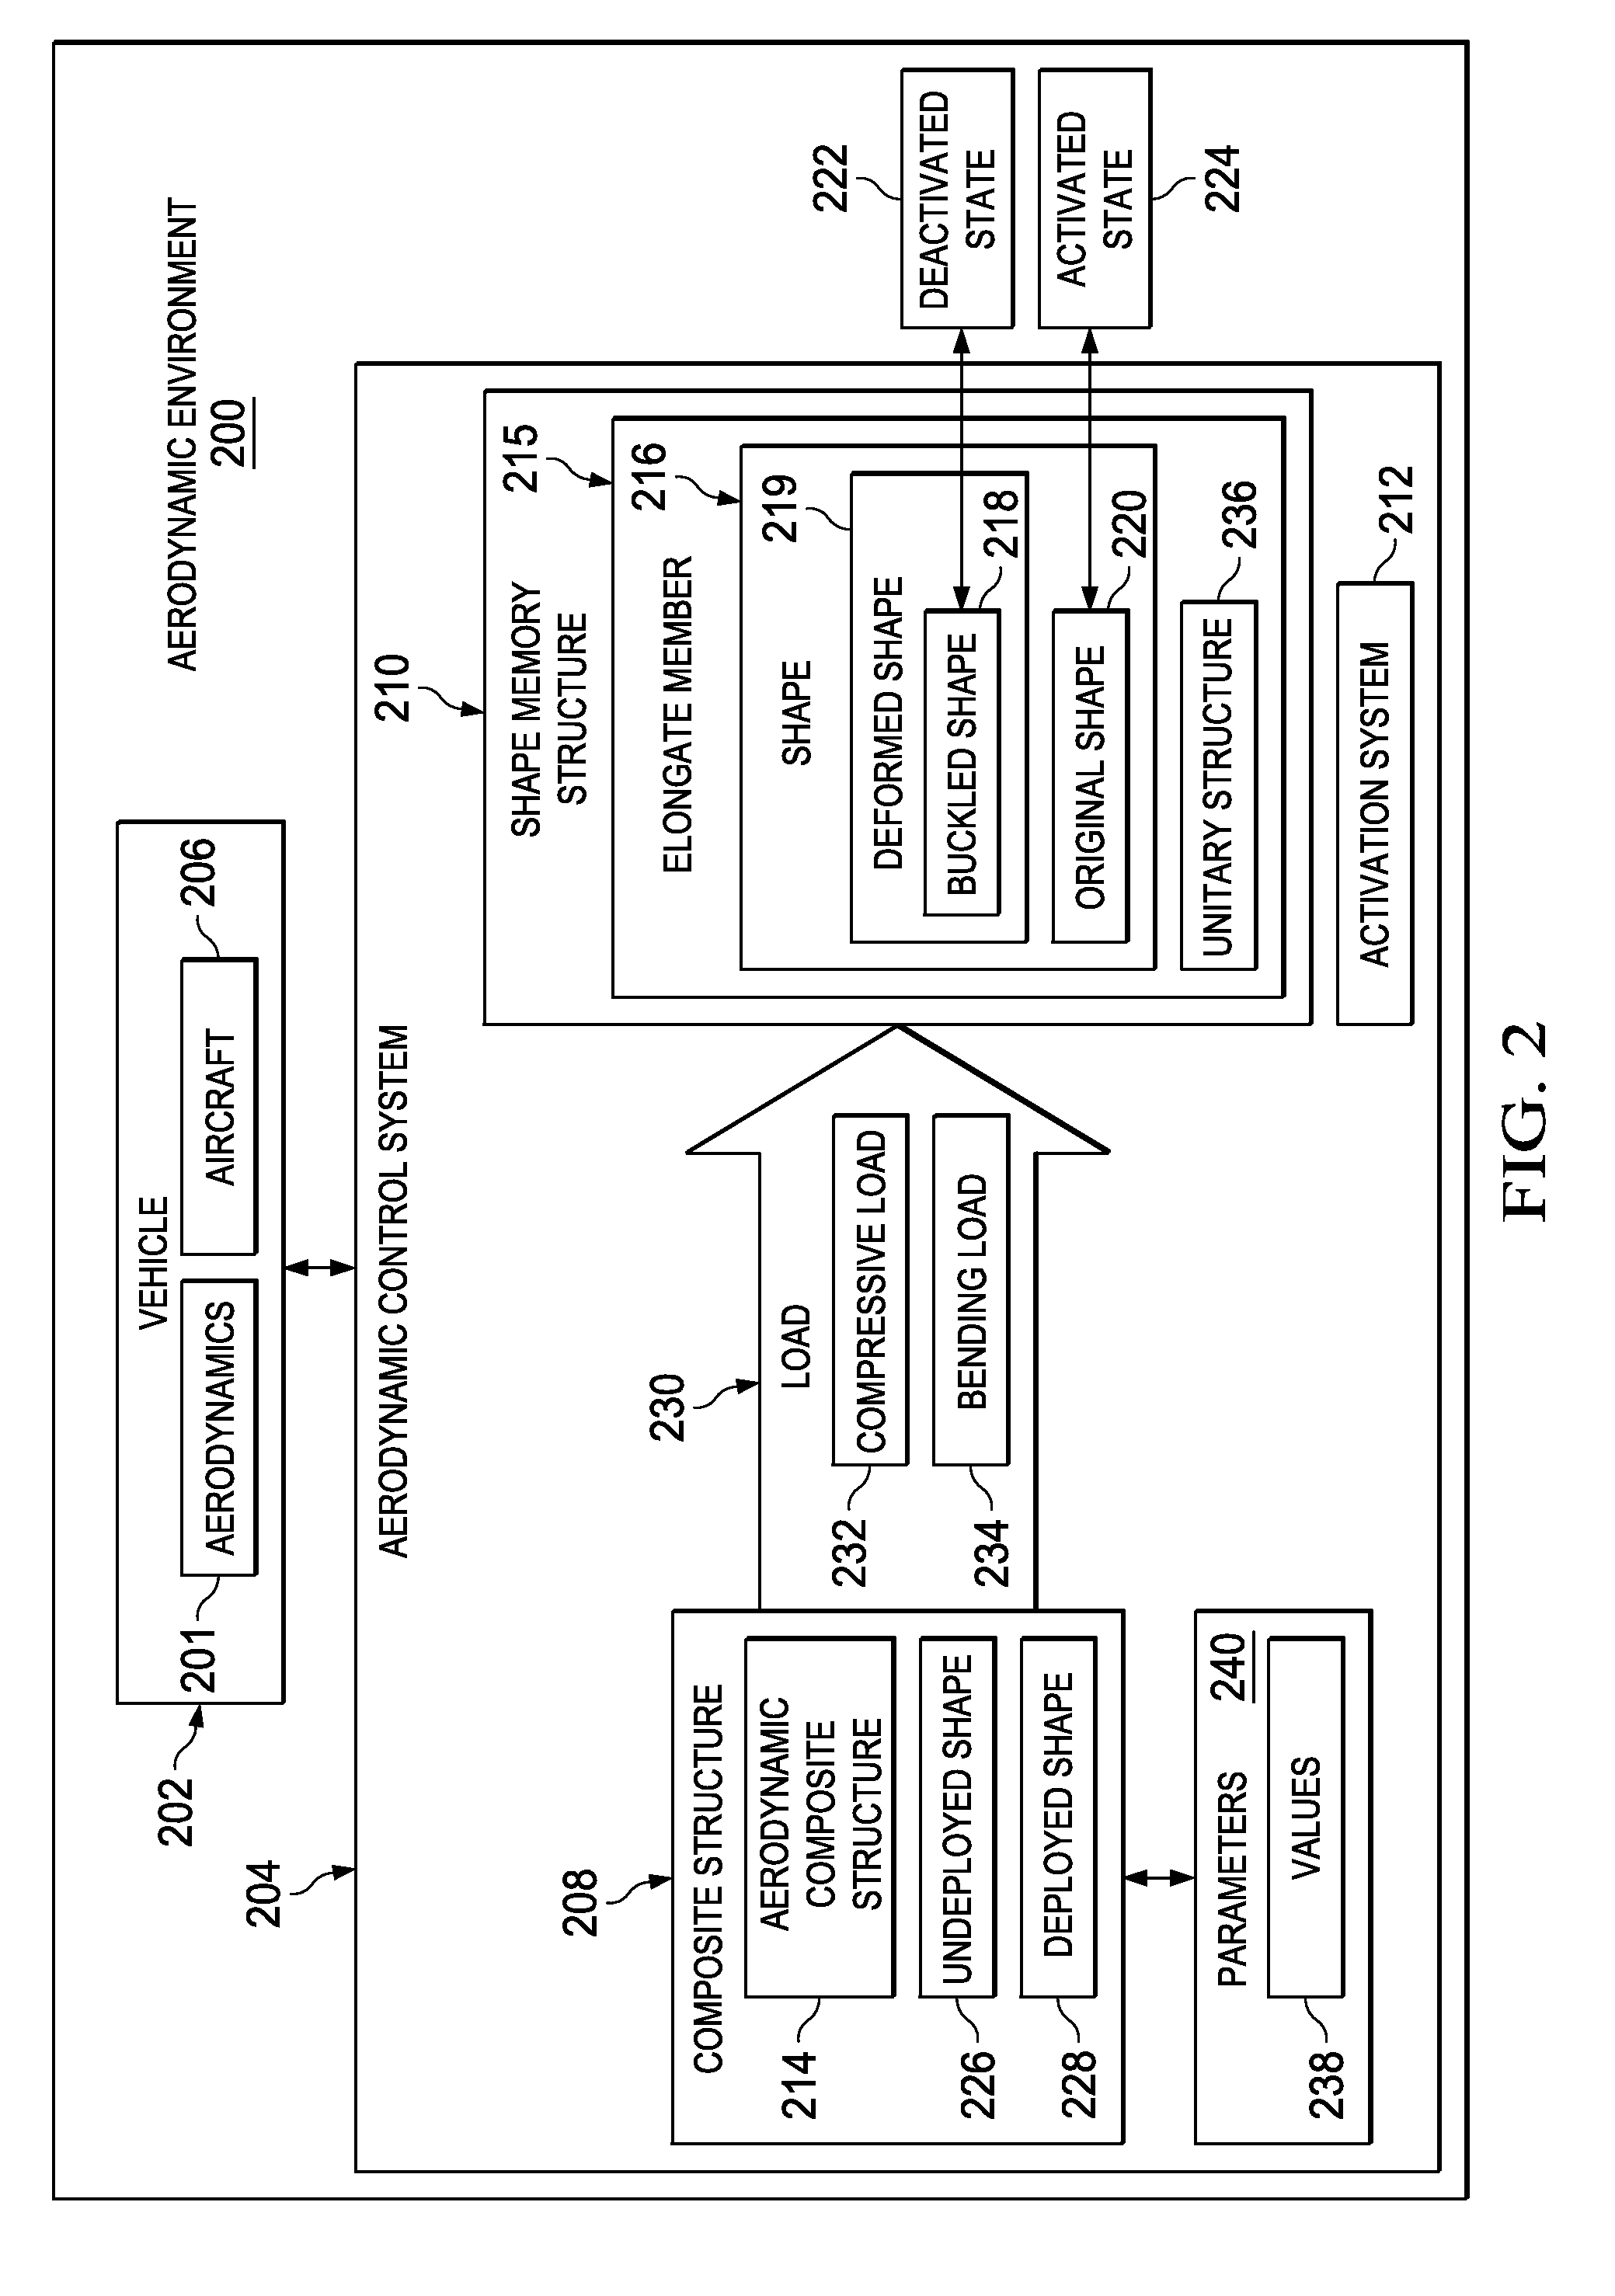 Shape Memory Alloy Actuator System for Composite Aircraft Structures